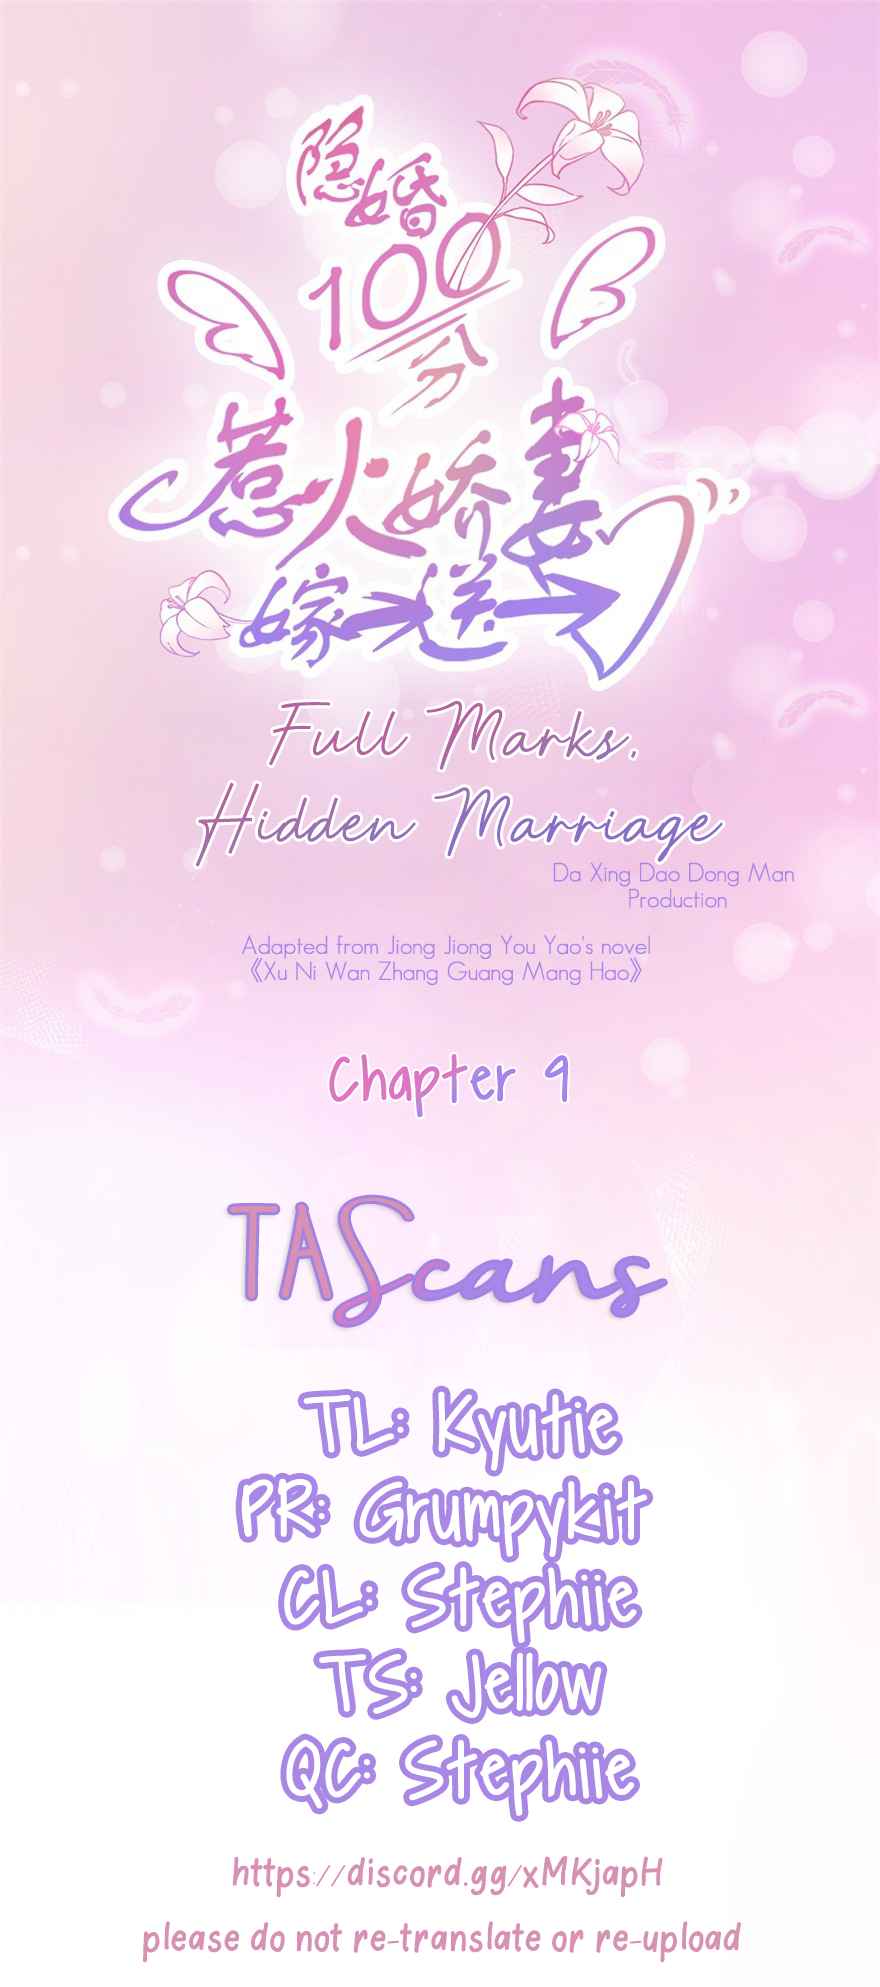 Full Marks, Hidden Marriage (大行道动漫) Ch. 9 The Person You Like is a Girl Right?